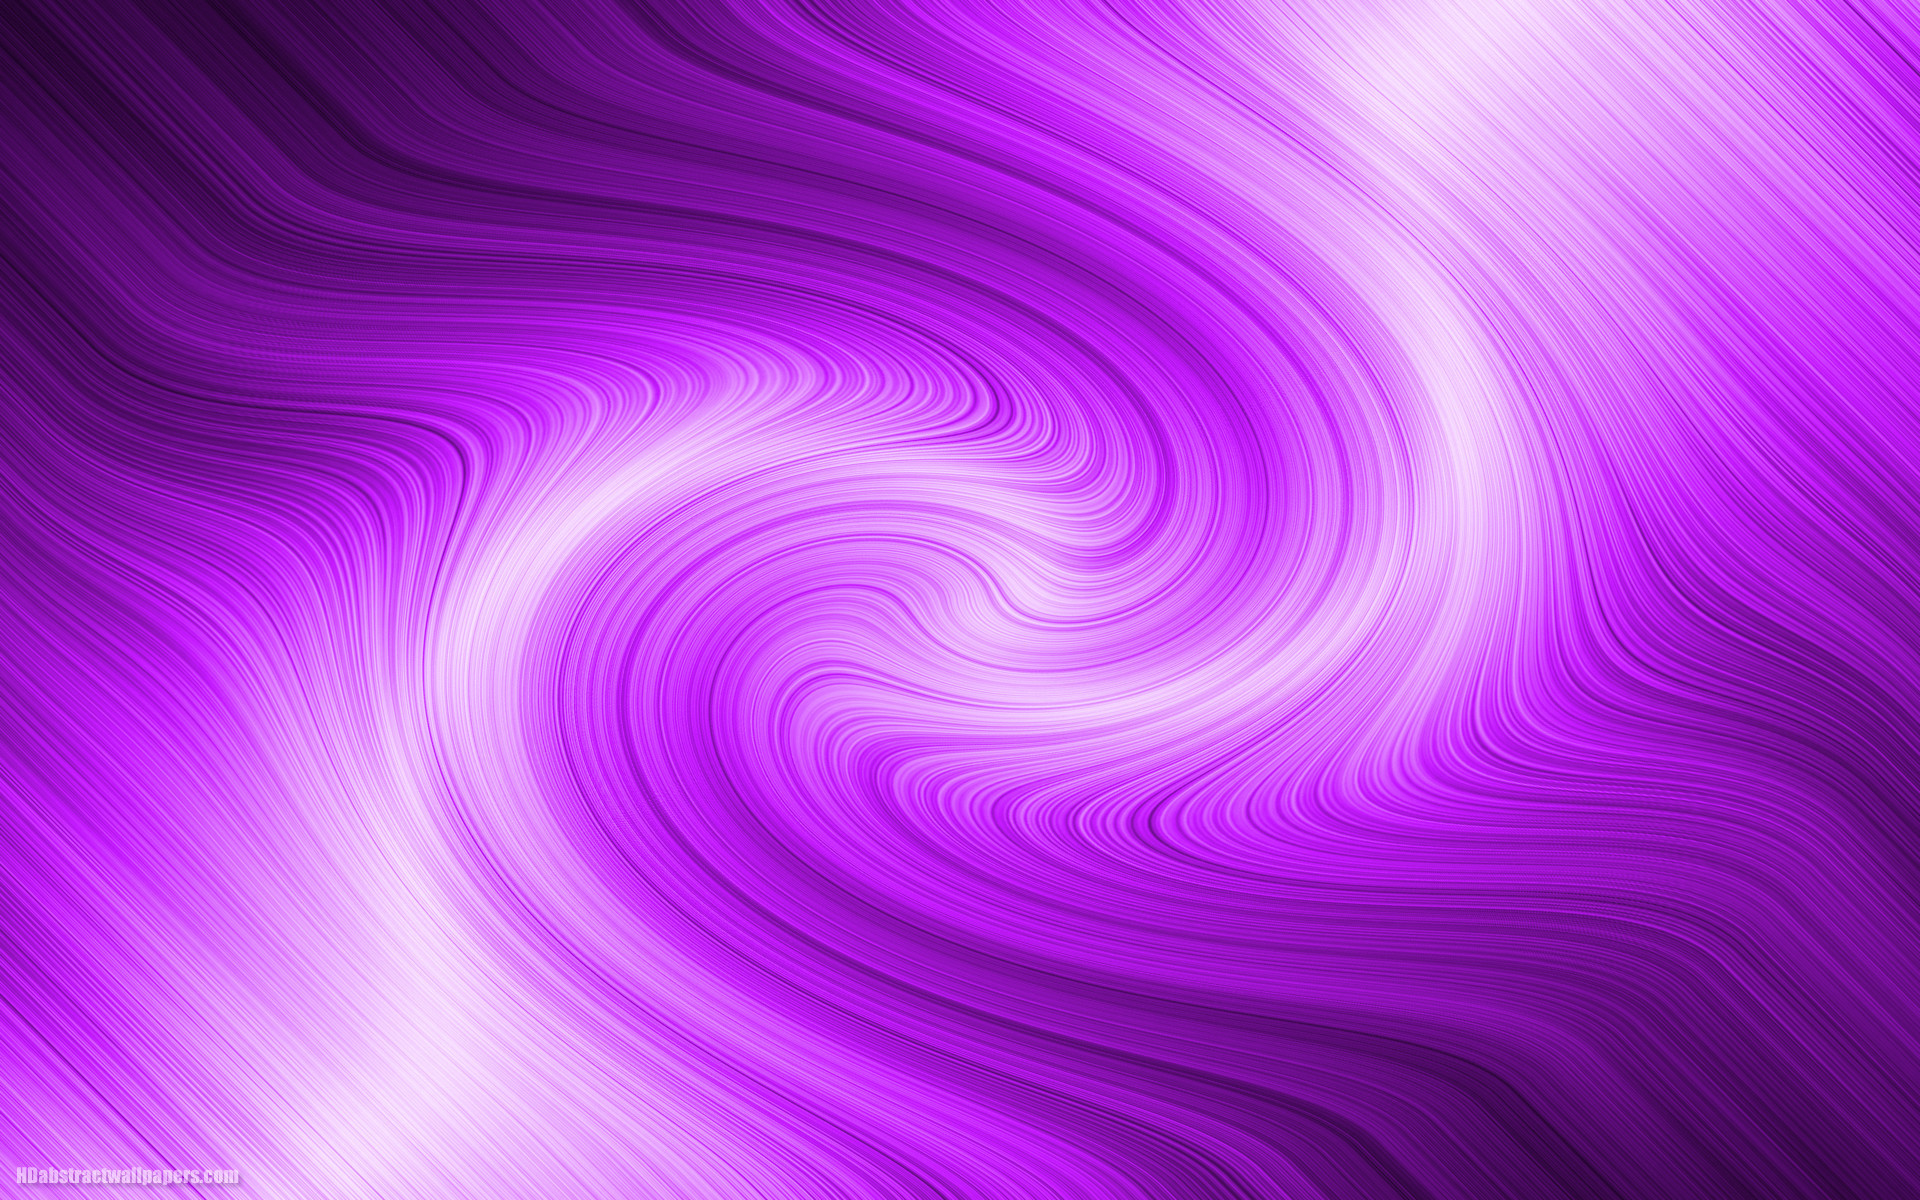 1920x1200 View Original Size Source Â· Purple Background HD  Abstract ...